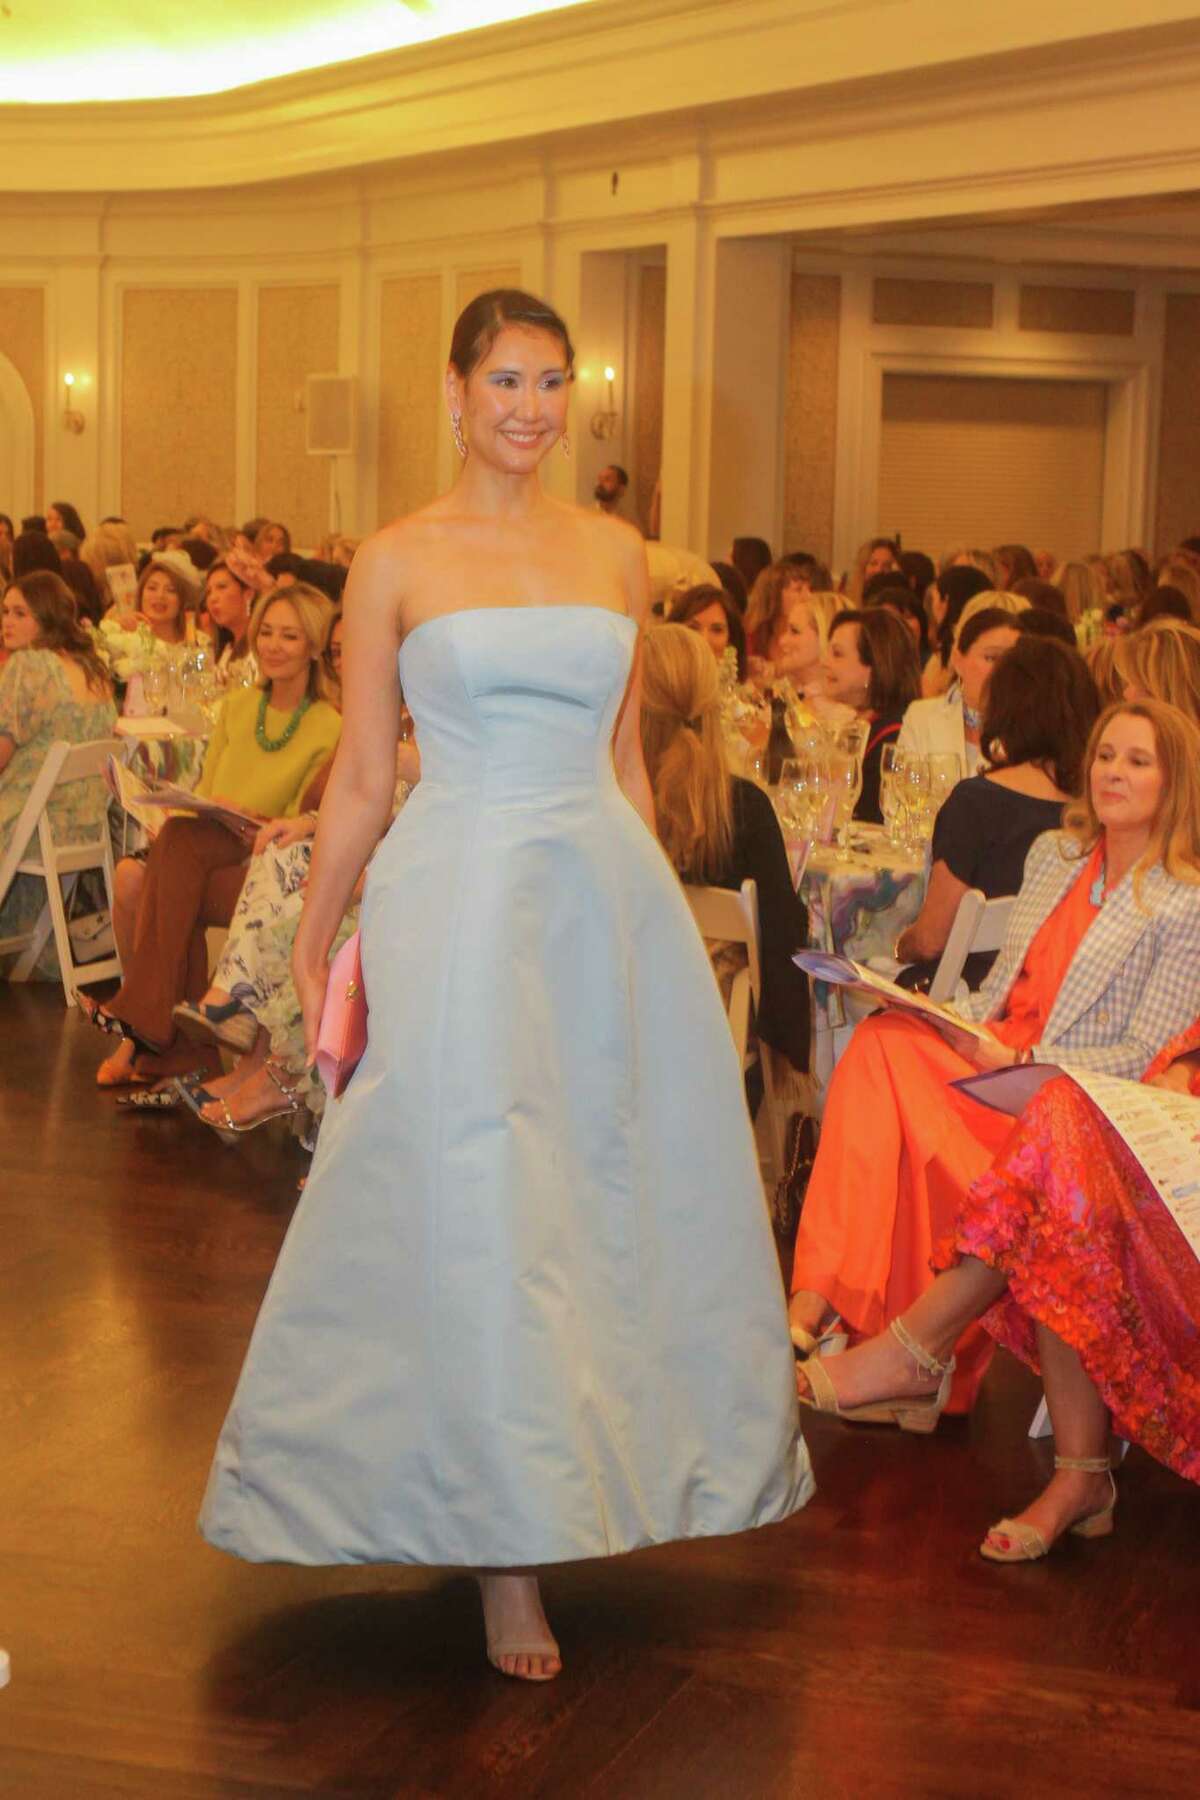 The show must go on. Inside Tootsies' tennis fashion show in River Oak